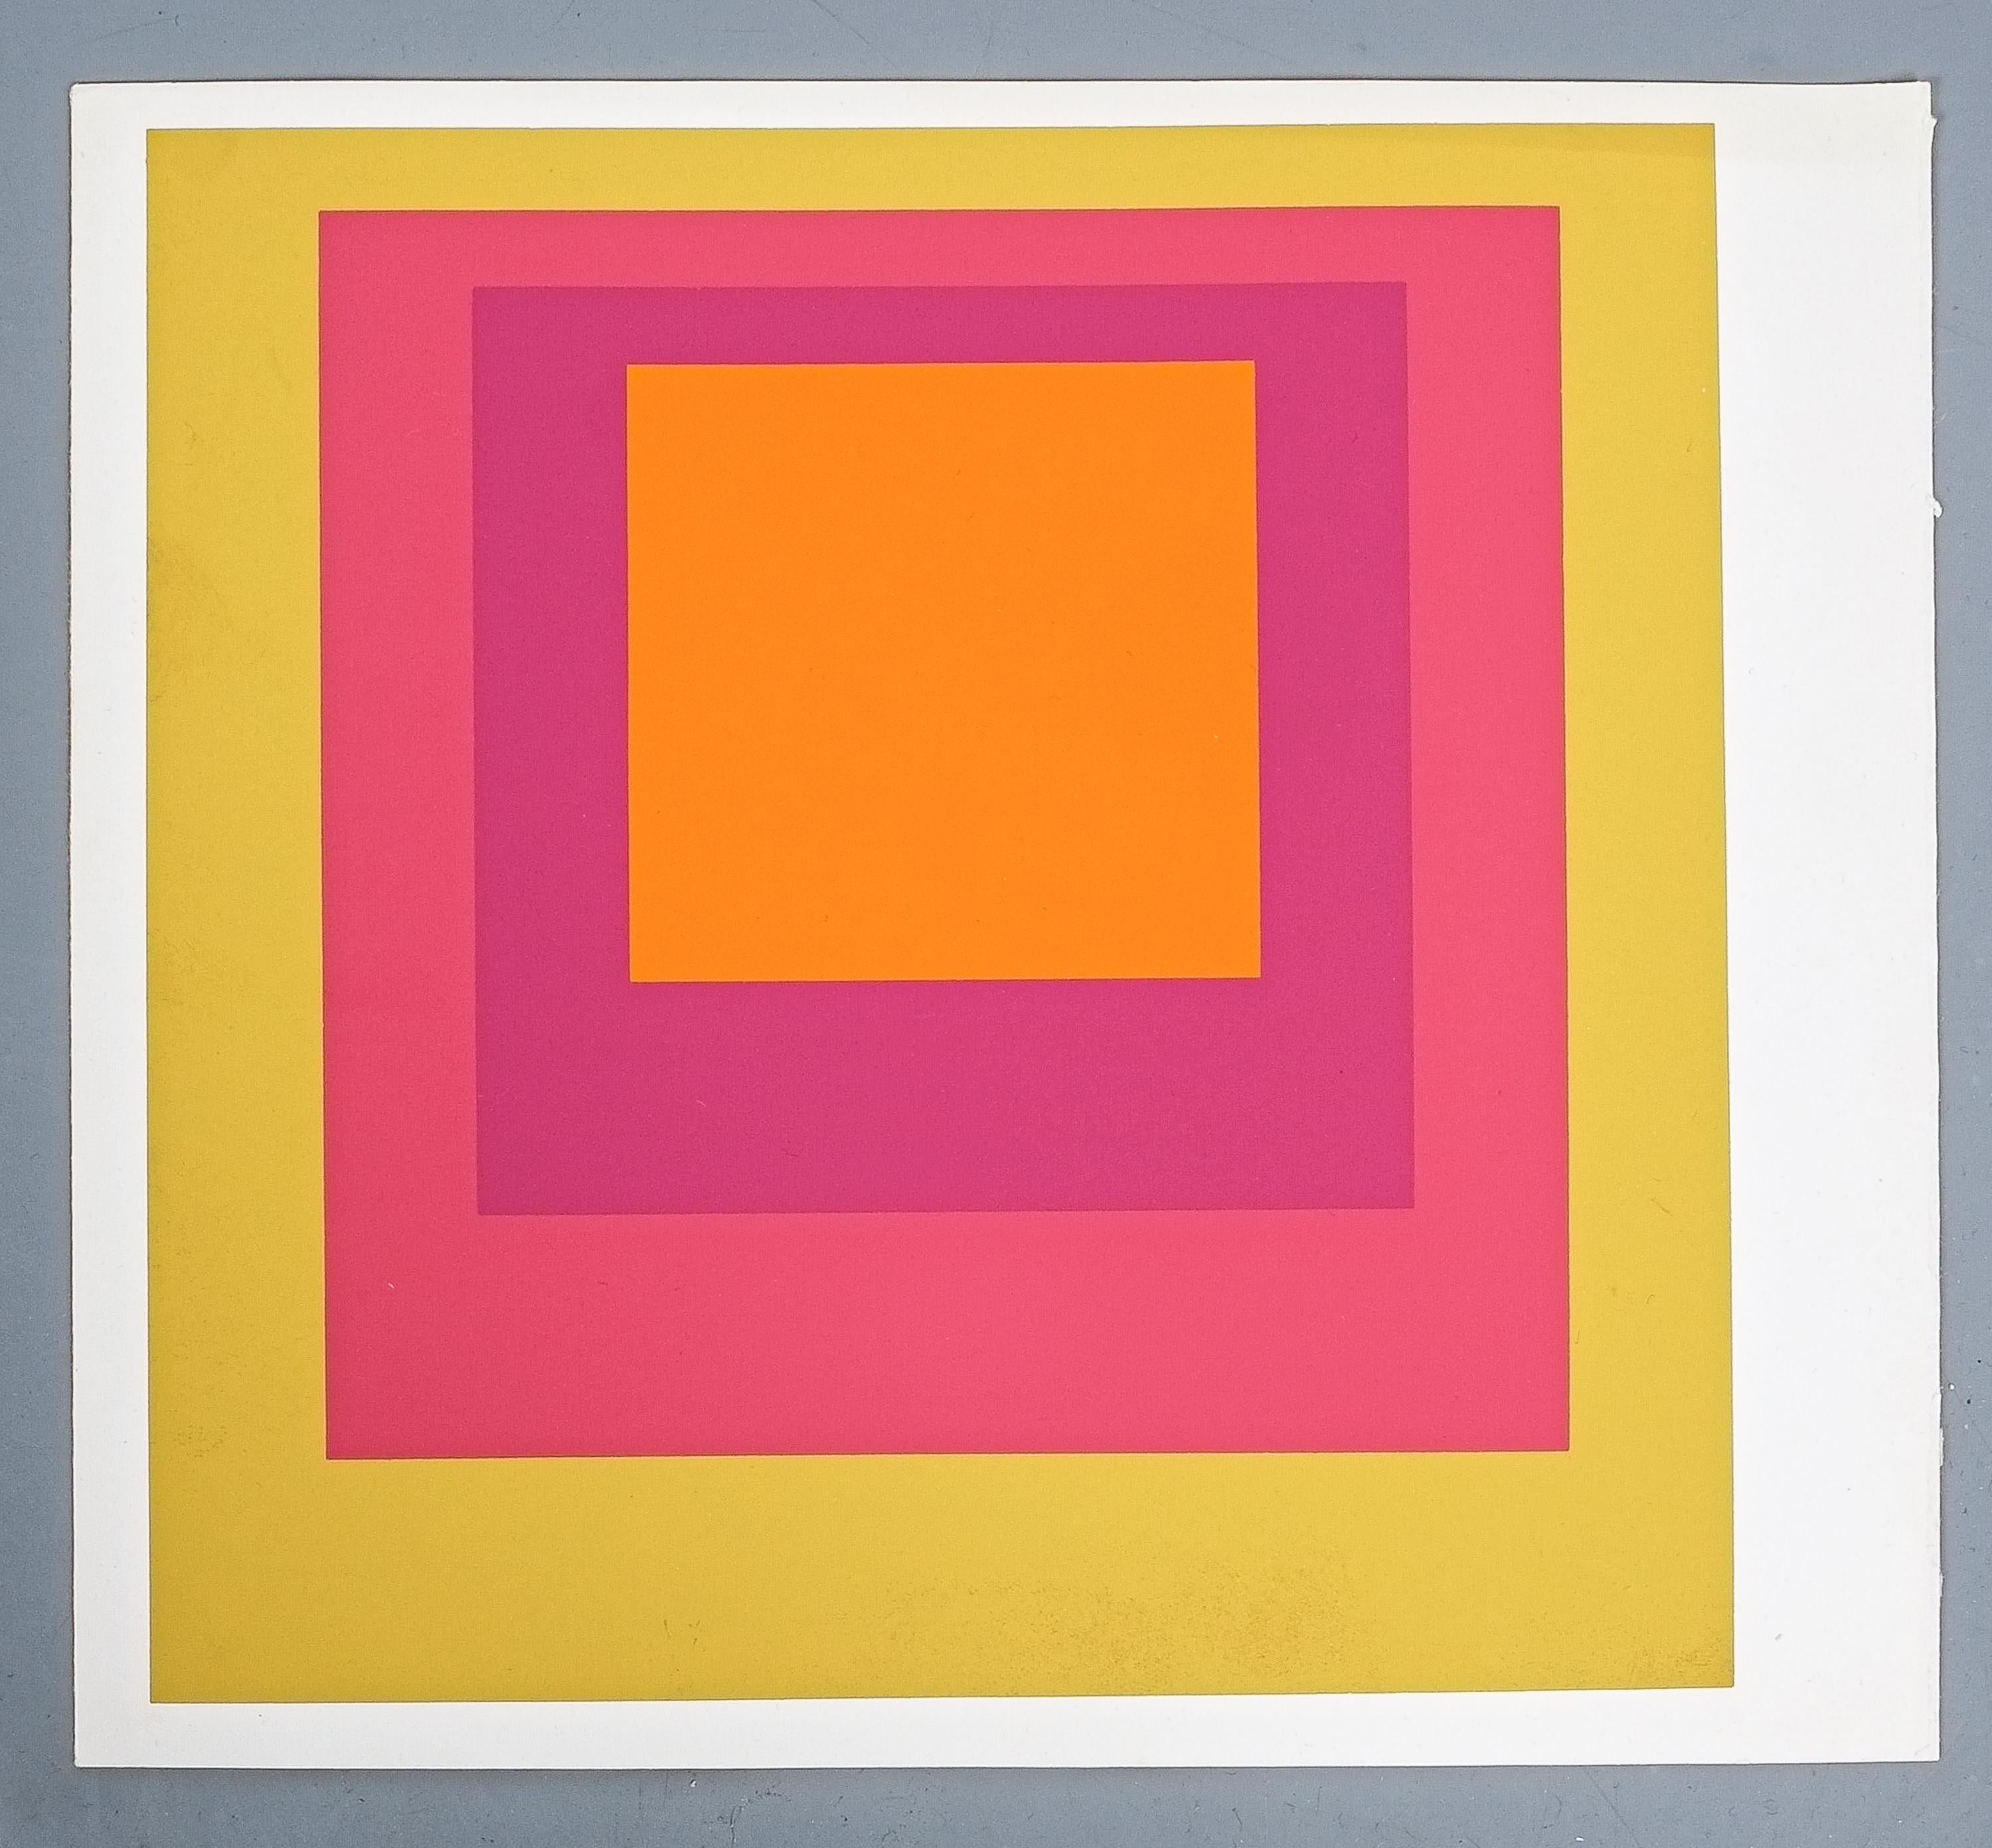 Late 20th Century 1 of 9 Screen-Prints Serigraph after Josef Albers, 1977